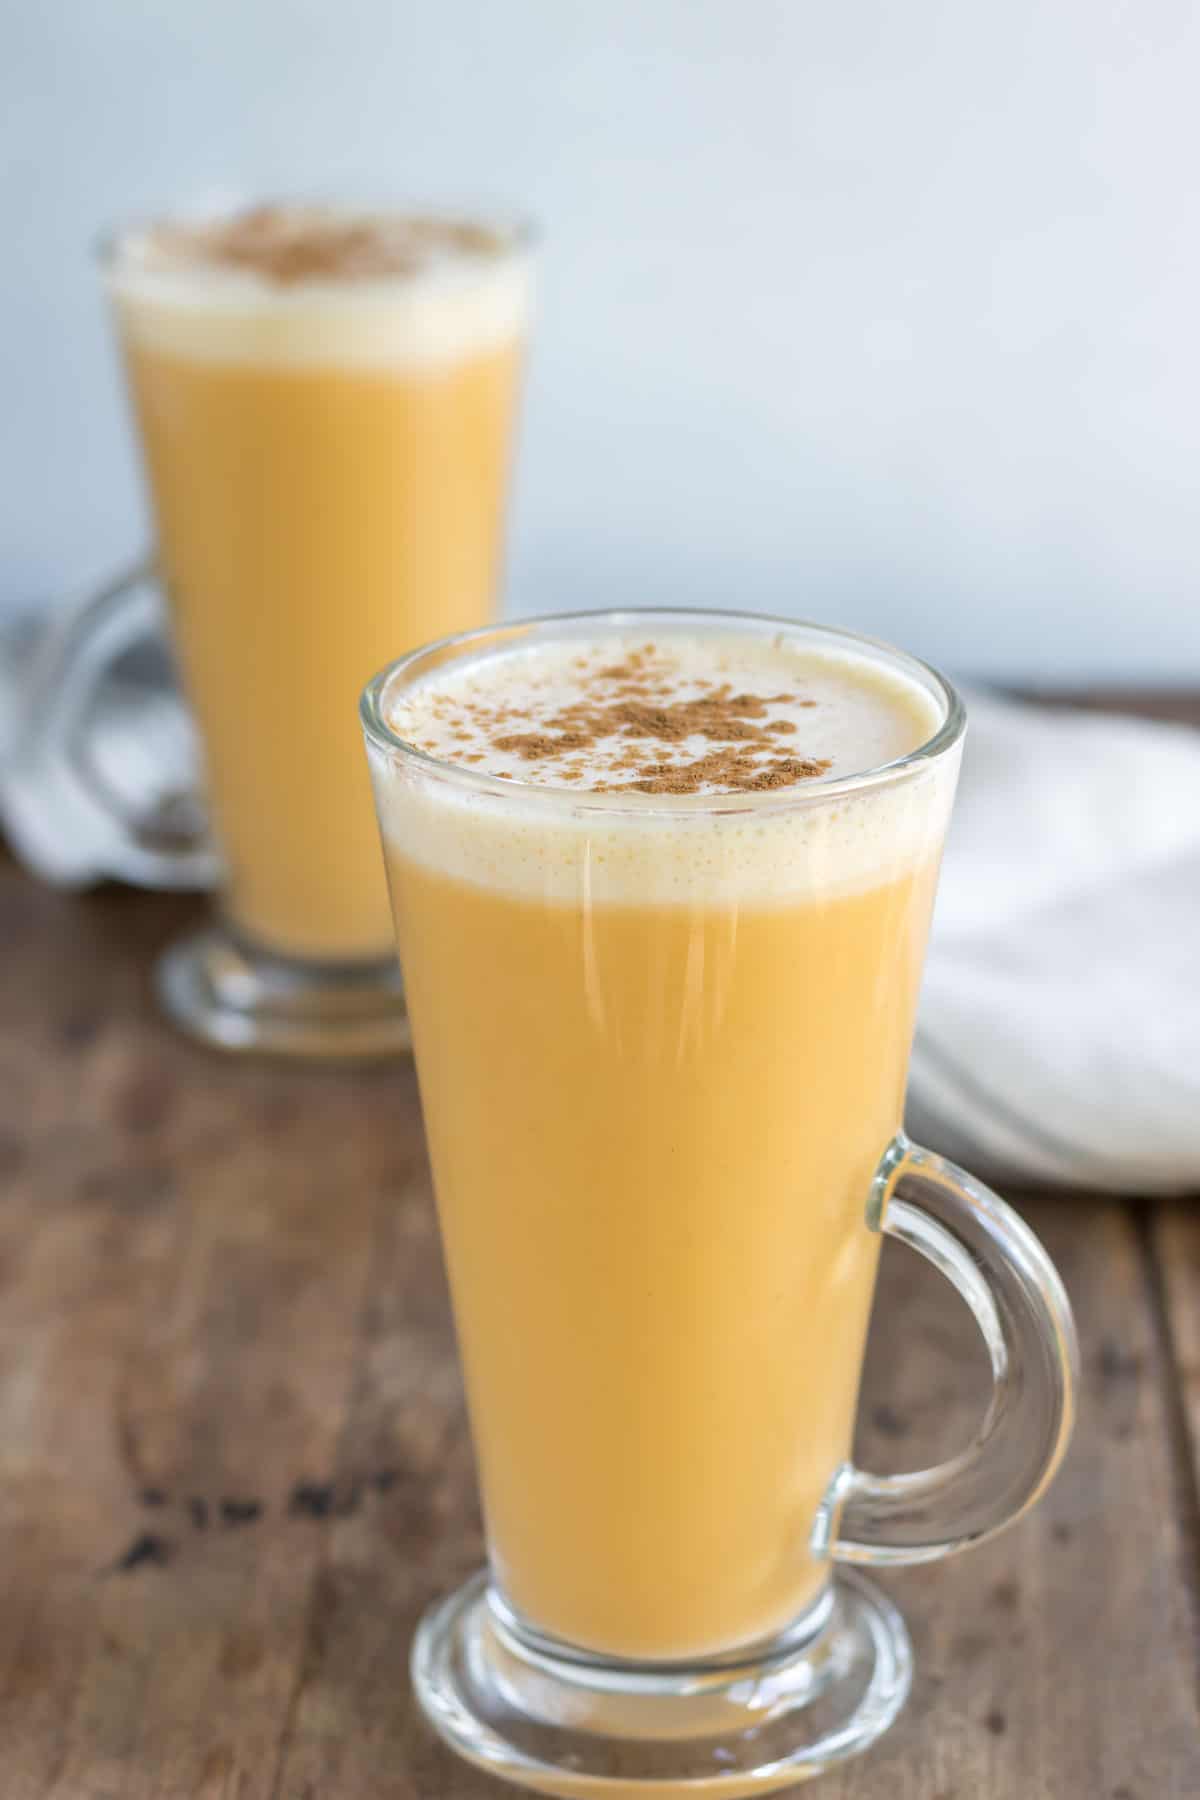 Latte glass filled with homemade sweet potato latte.